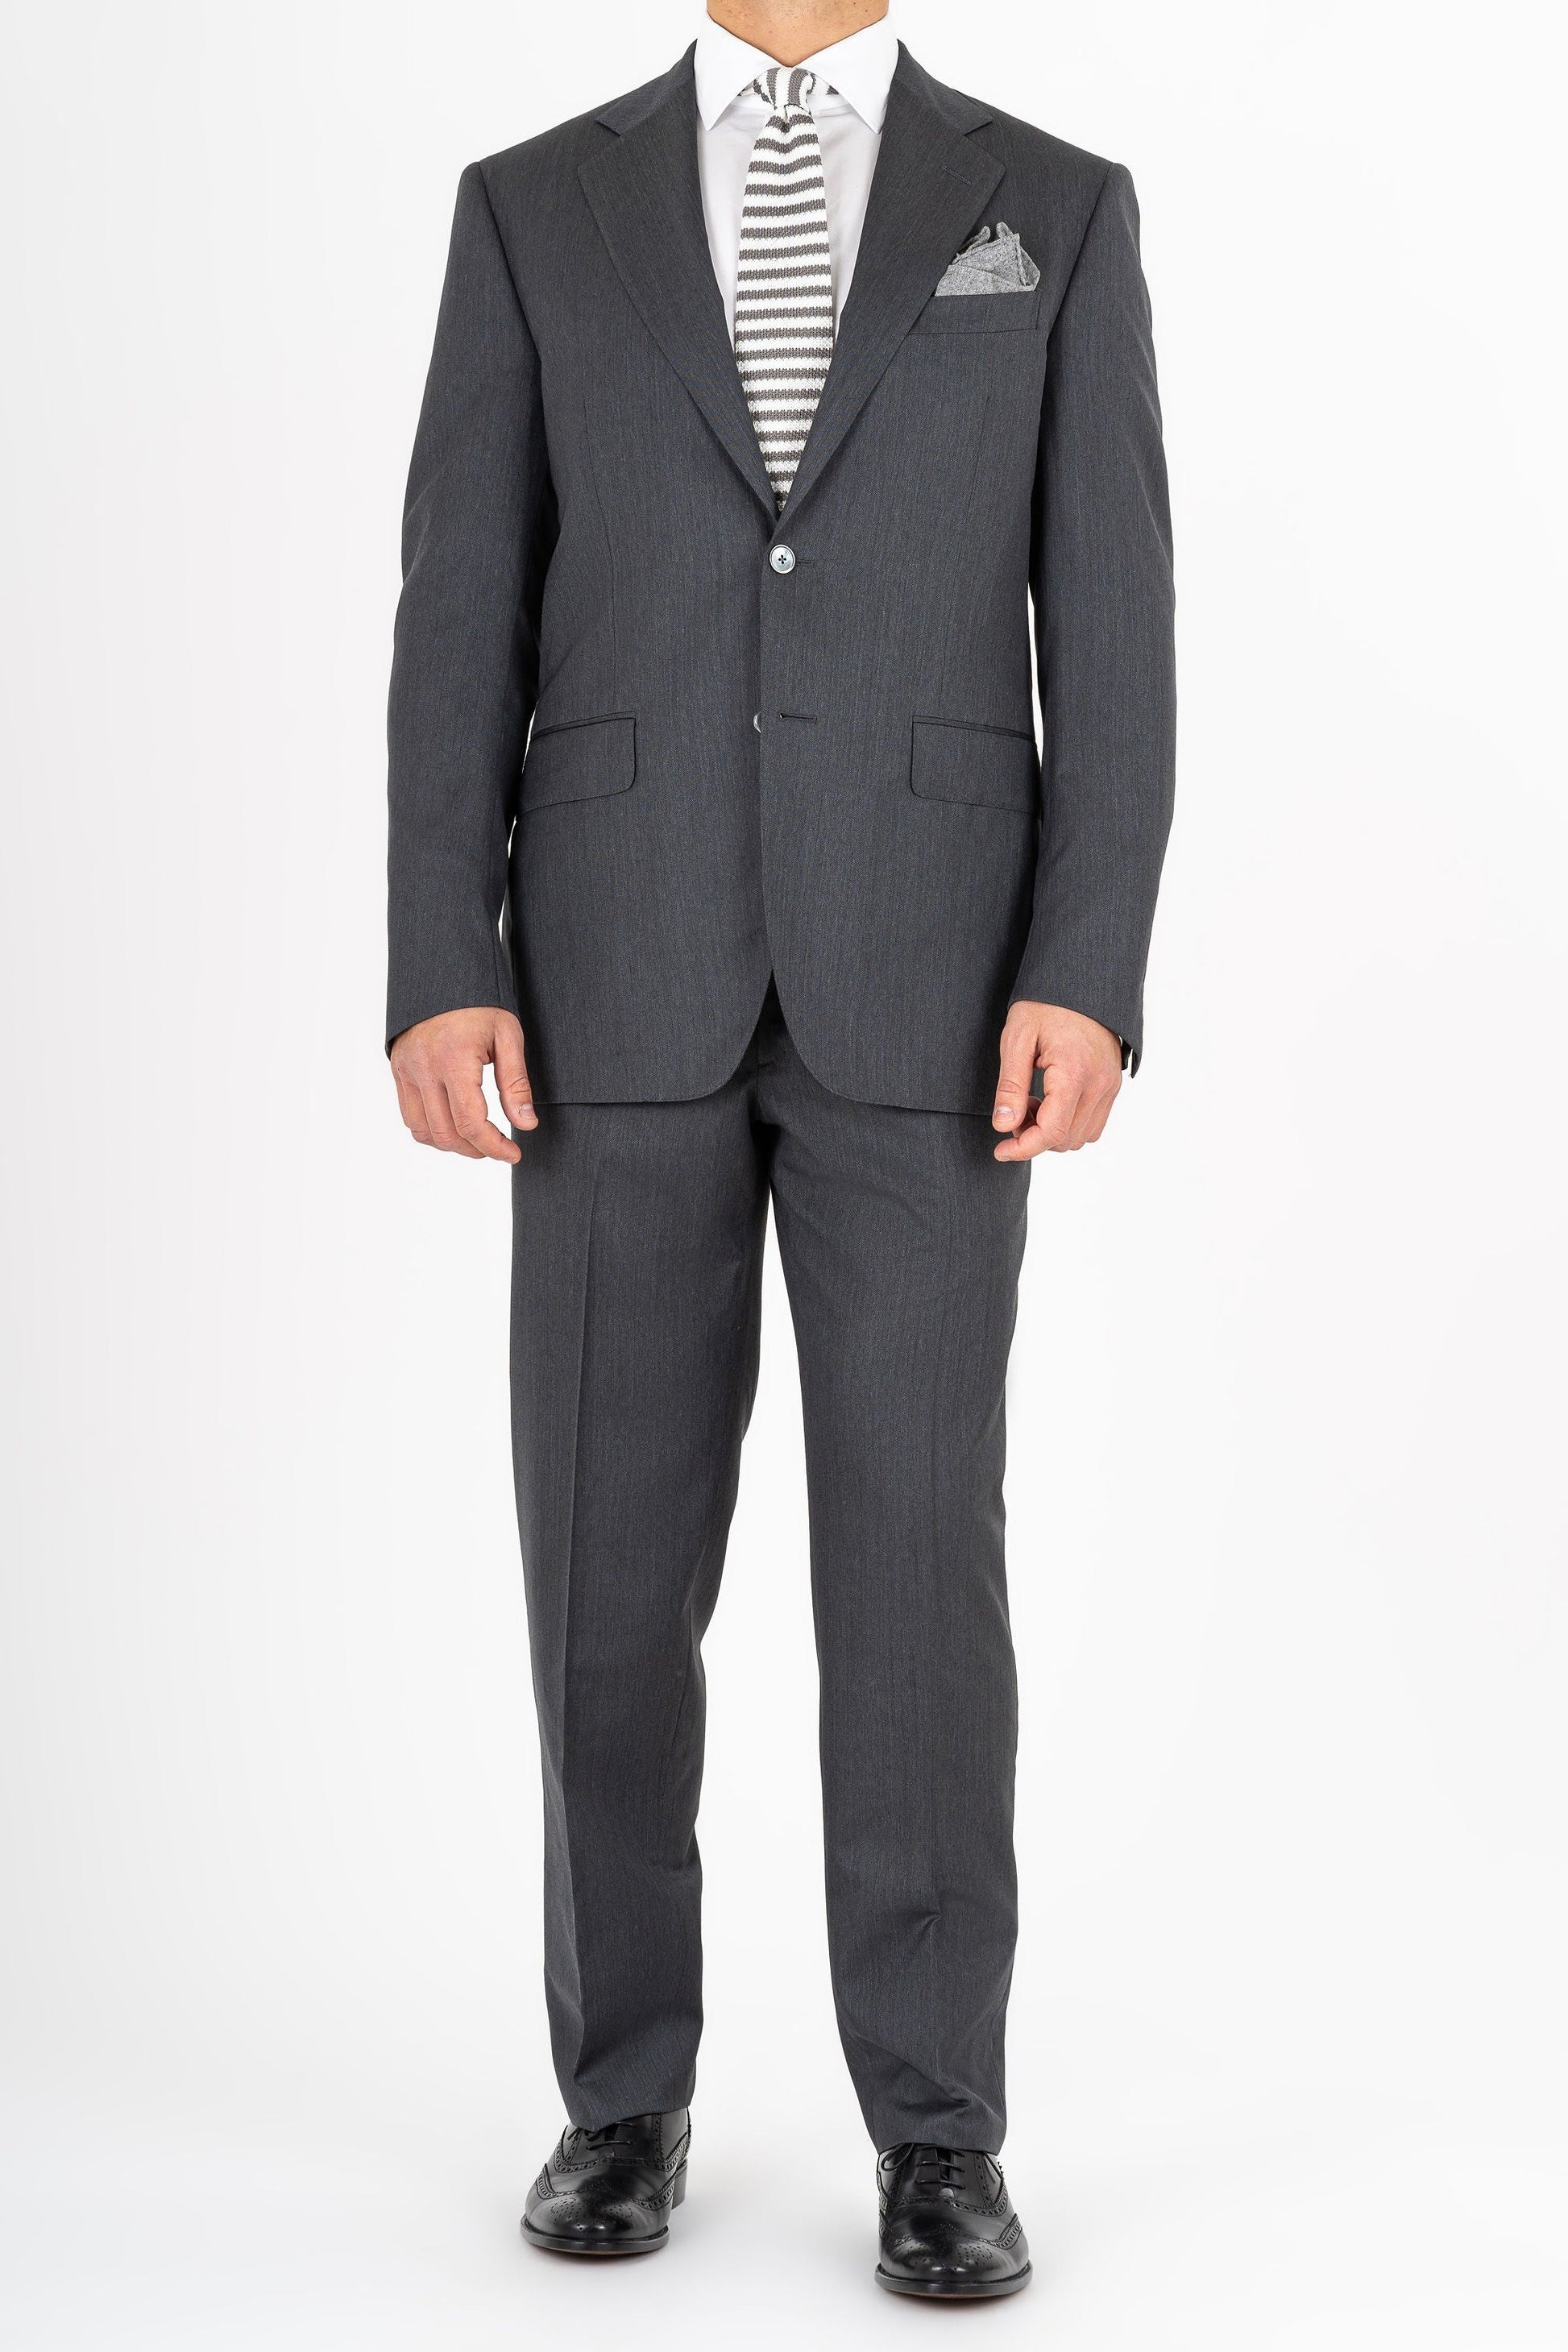 This Sartoria dei Duchi suit is made with Caccioppoli Super 150’s fabric, made with 96% wool and 4% cashmere. Two-button fully lined jacket with classic lapel and flap pockets. The trousers are realized without pleats and with American style pockets. All buttons are made with the finest quality Mother of pearl.